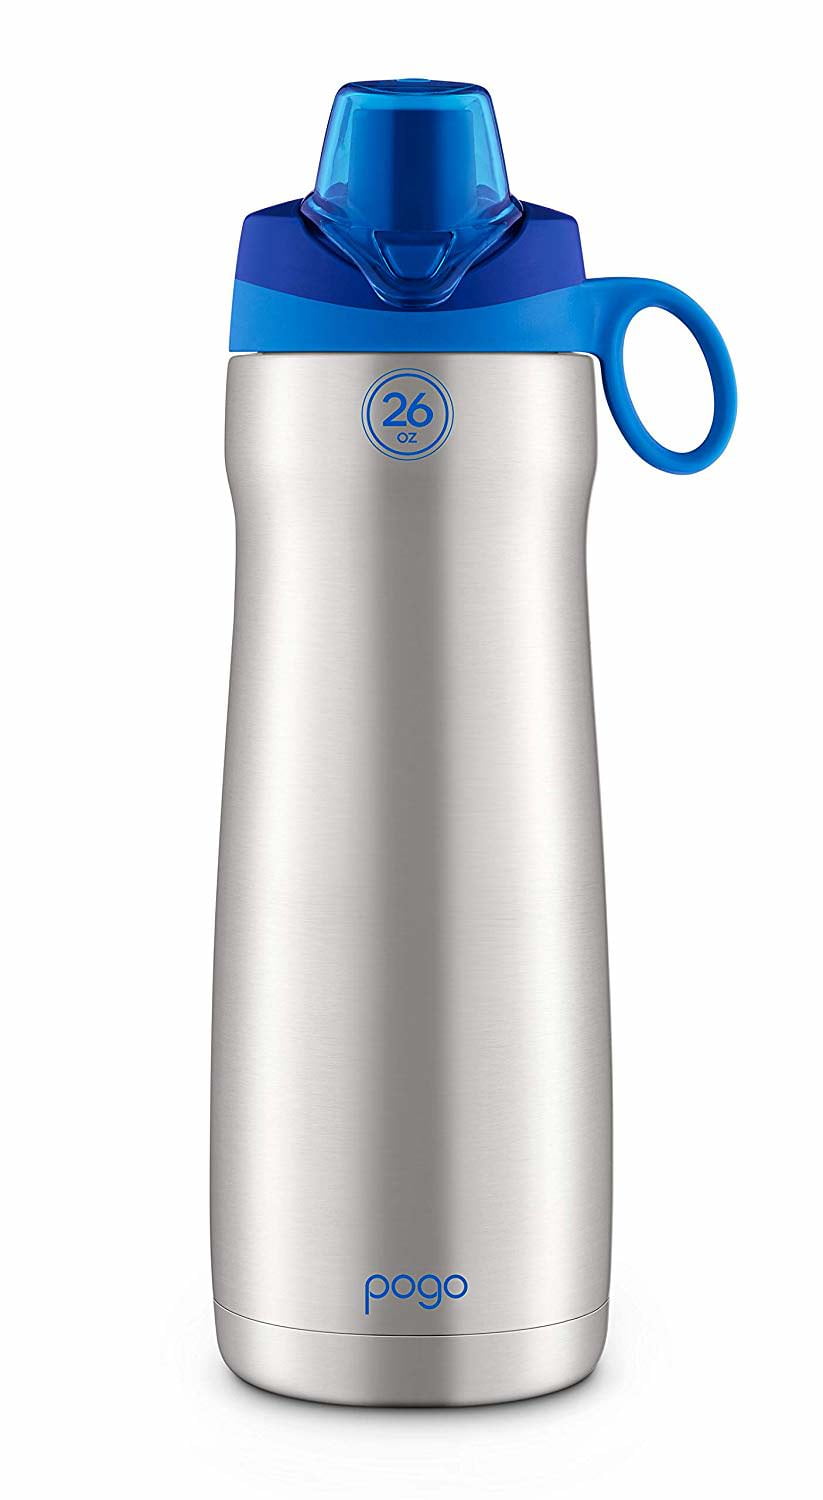 Pogo Vacuum Stainless Steel Water Bottle with Chug Lid, Blue, 26 oz Pogo Stainless Steel Water Bottle